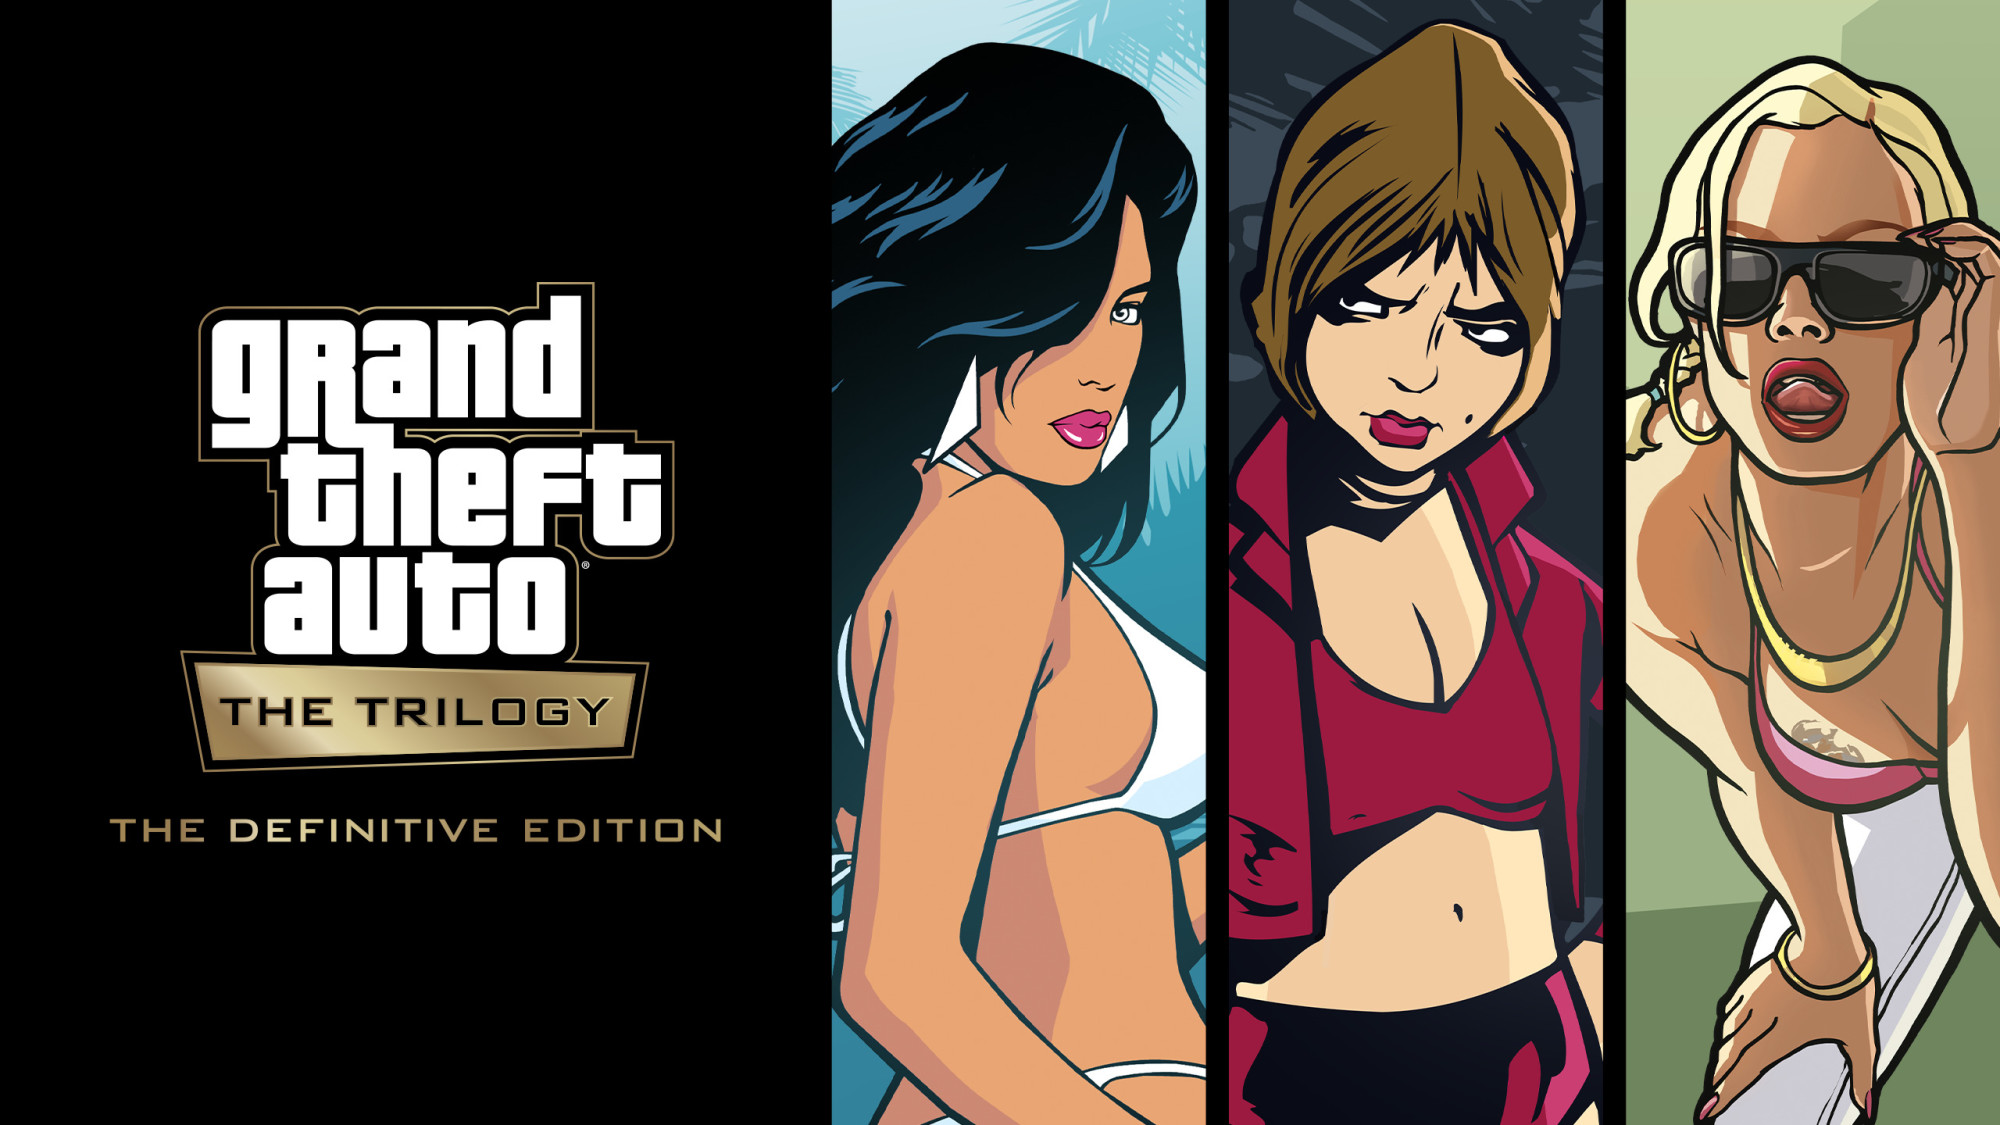 Grand Theft Auto: The Trilogy – The Definitive Edition Netflix